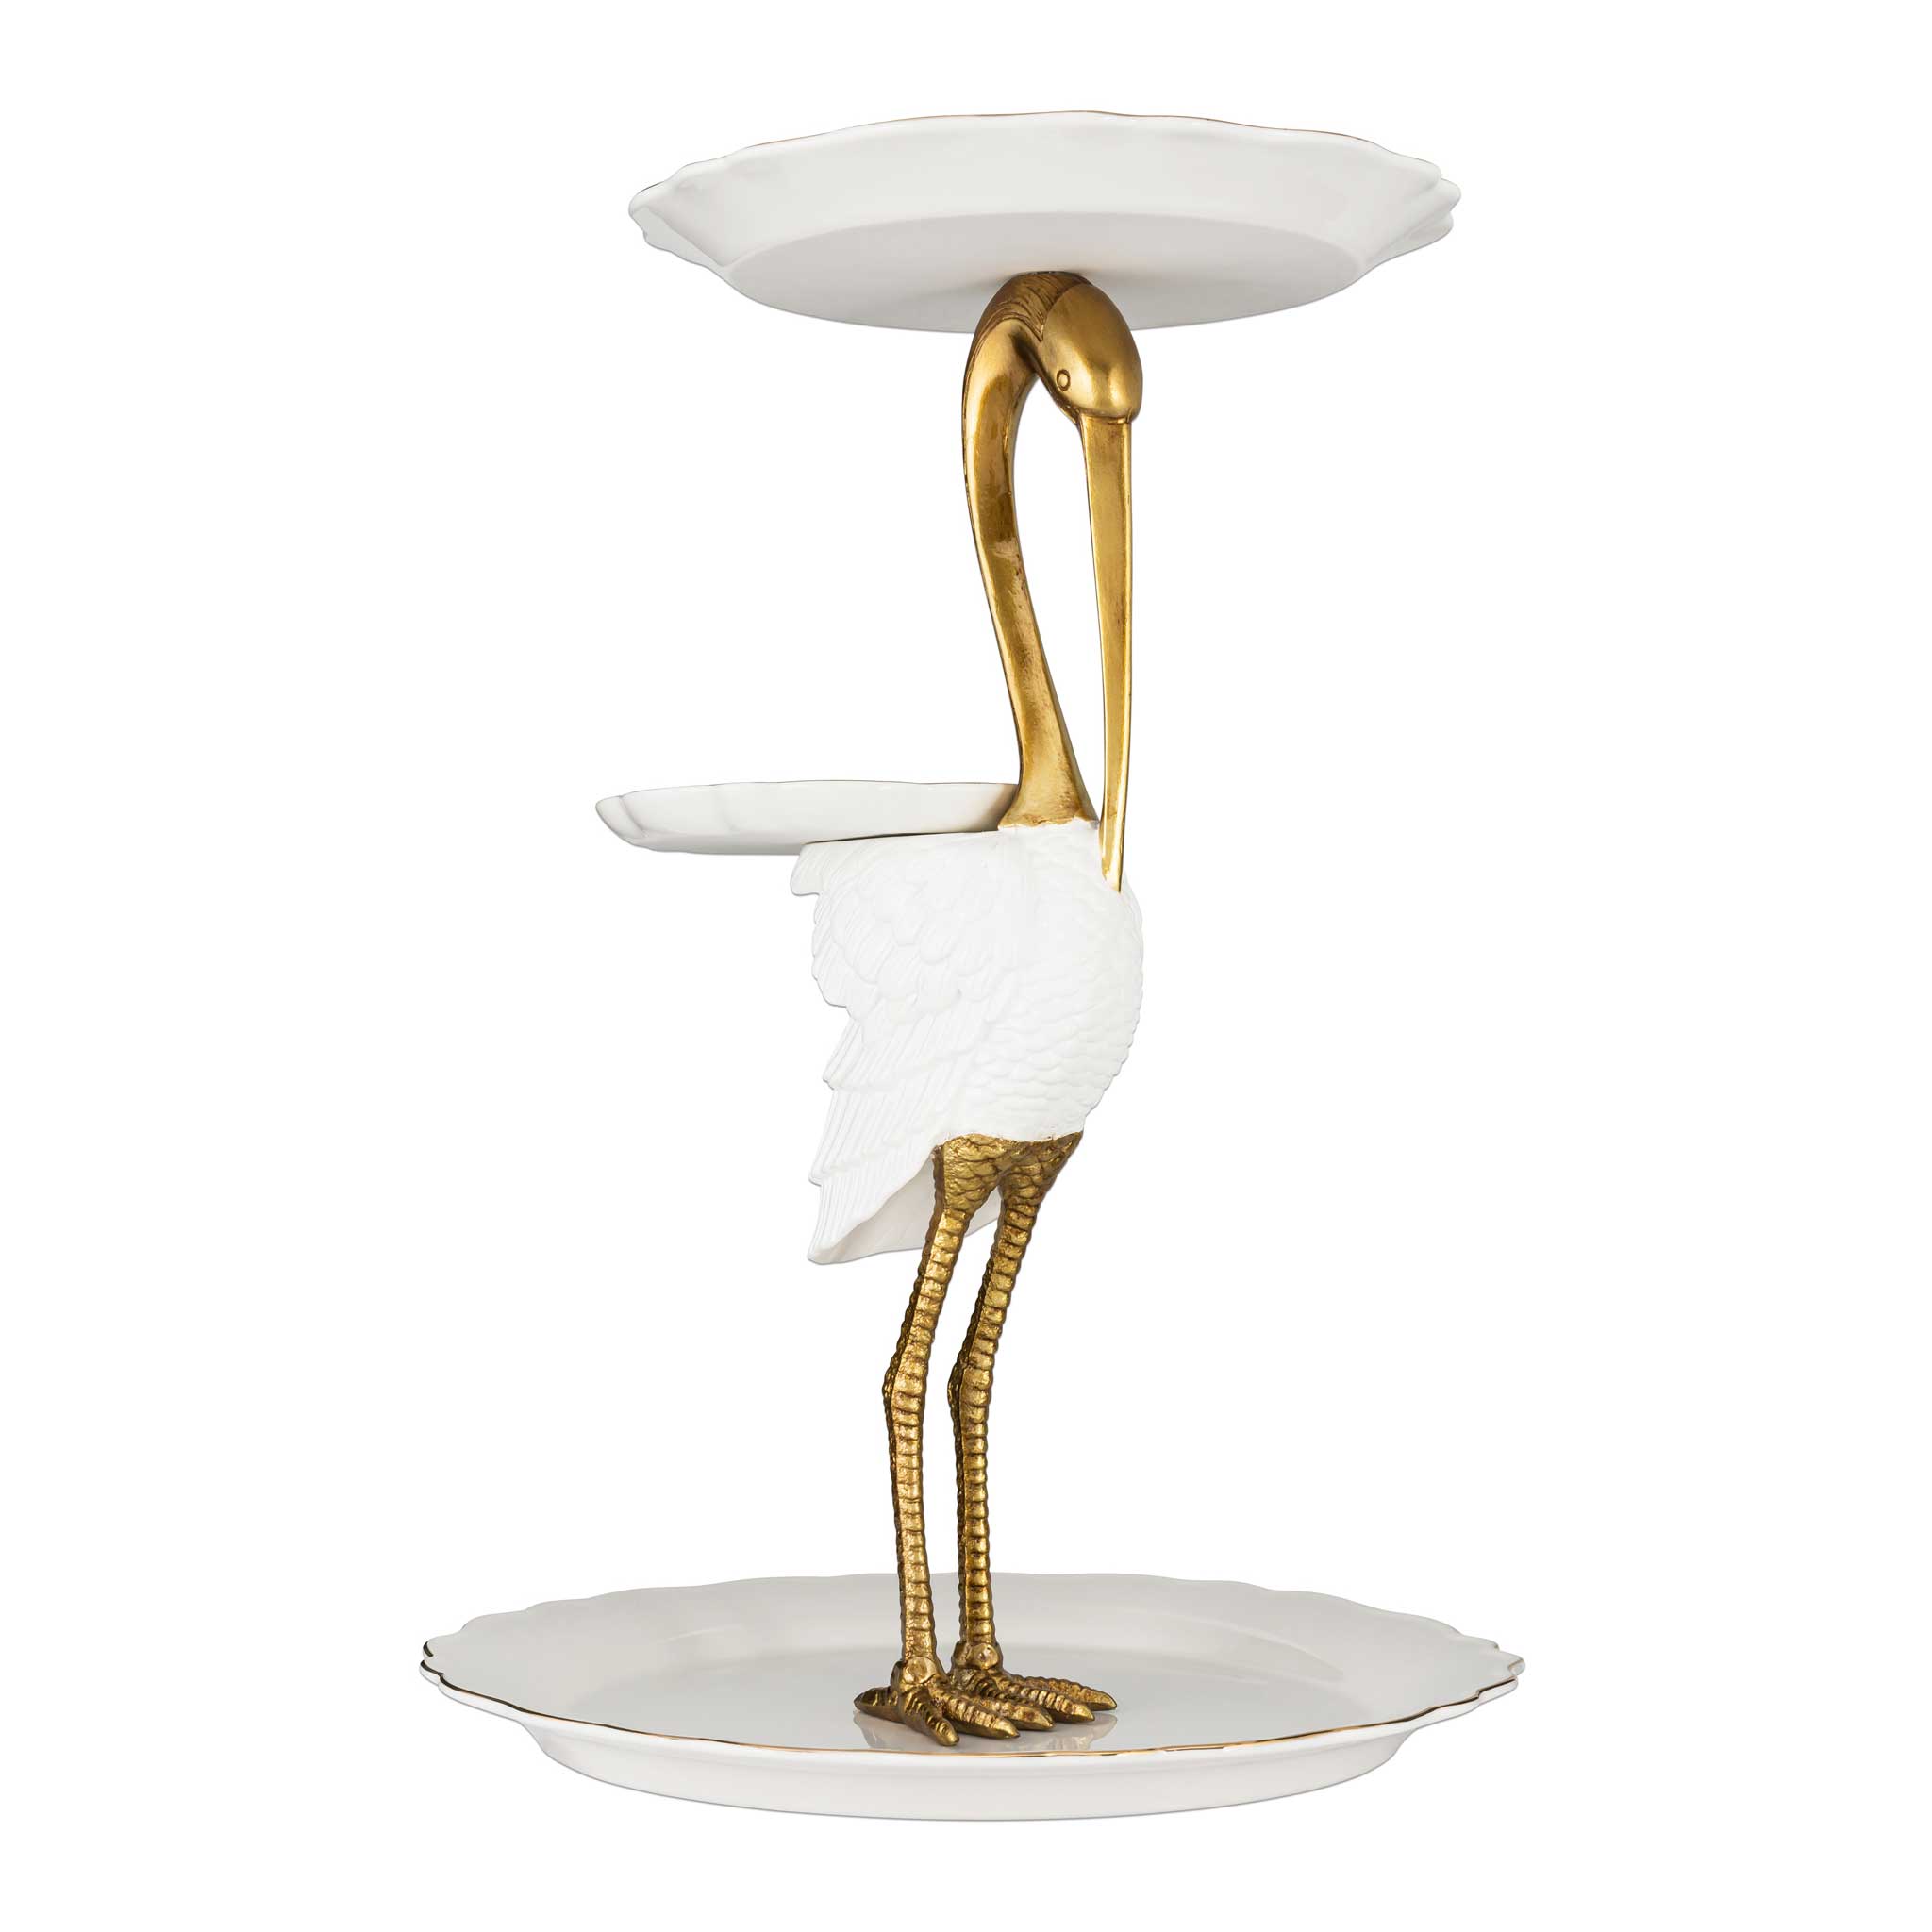 Gold and white Stand shaped like a Stork with serving plates on top, wing and base.